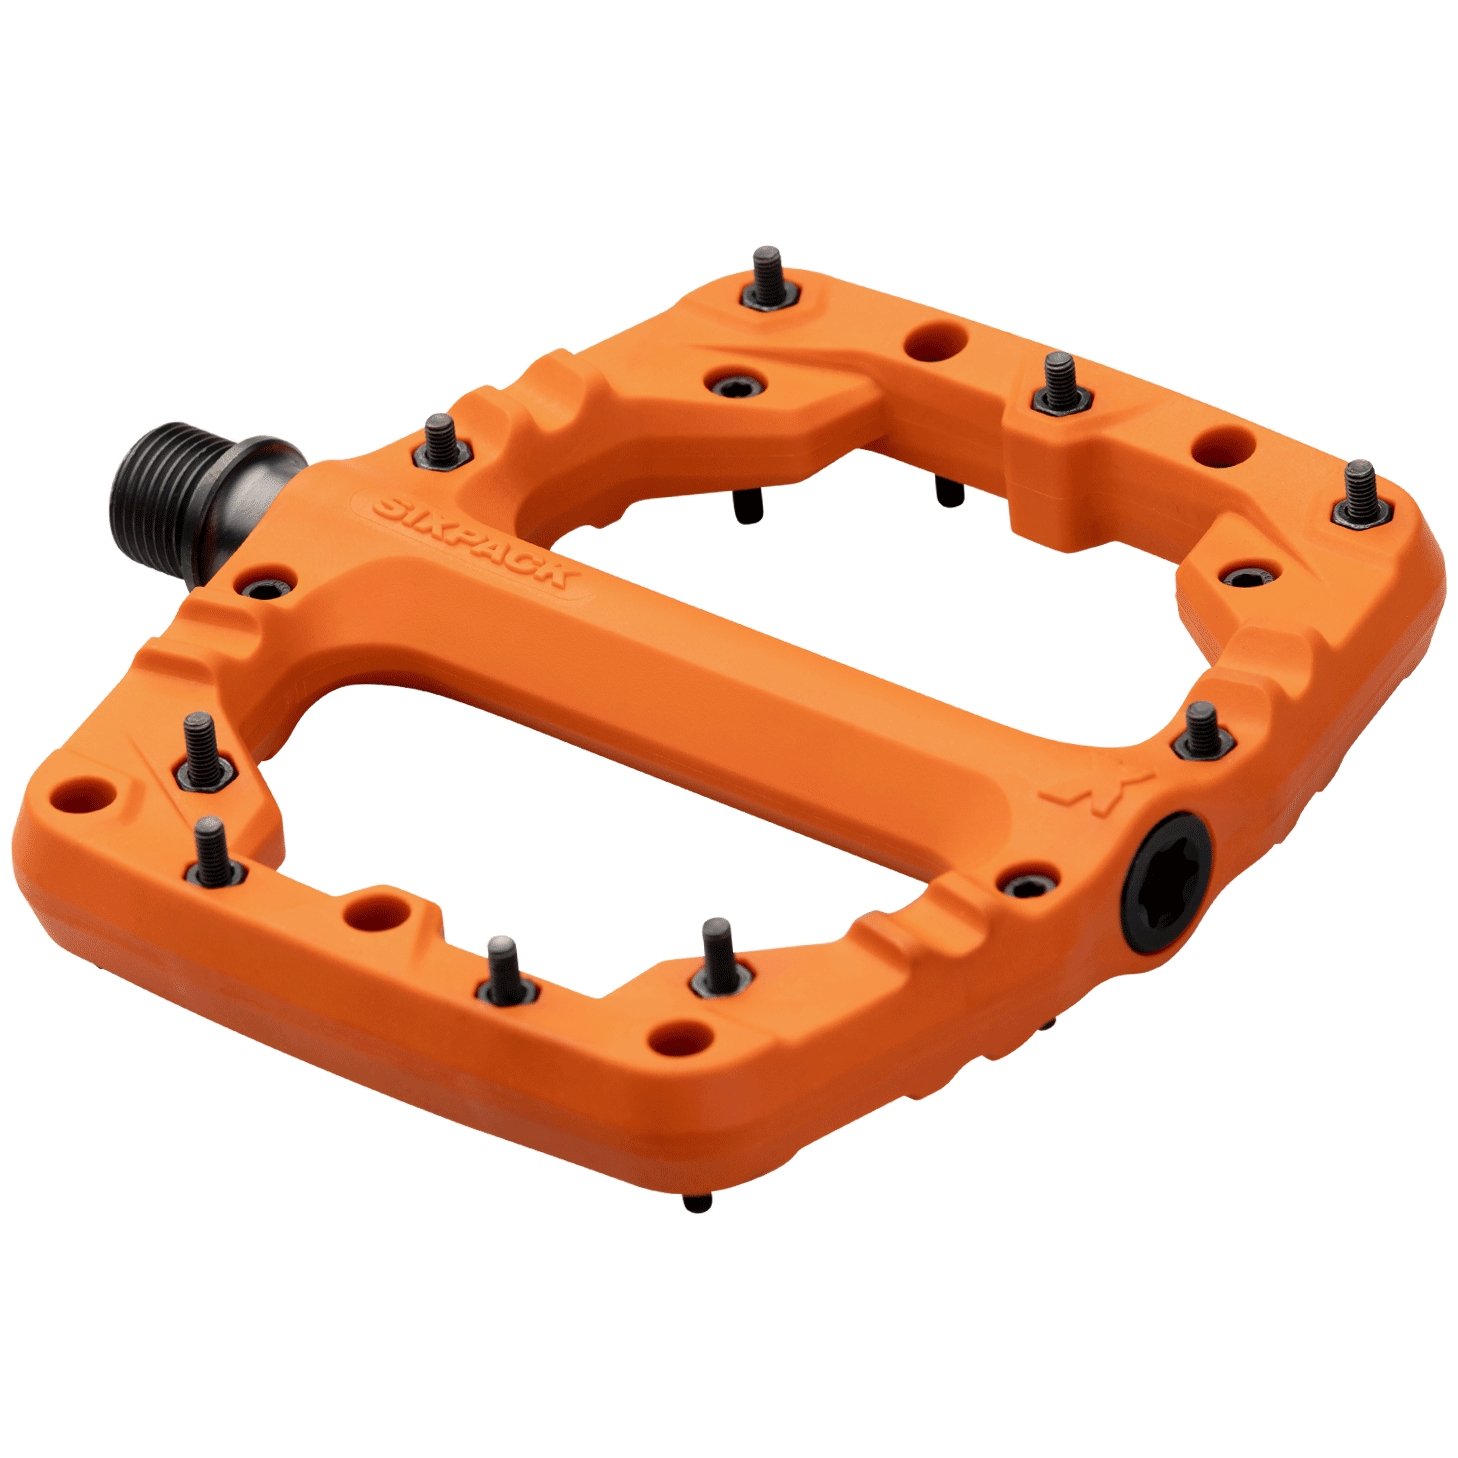 Picture of Sixpack Kamikaze PA Flat Pedals - foxhunt orange